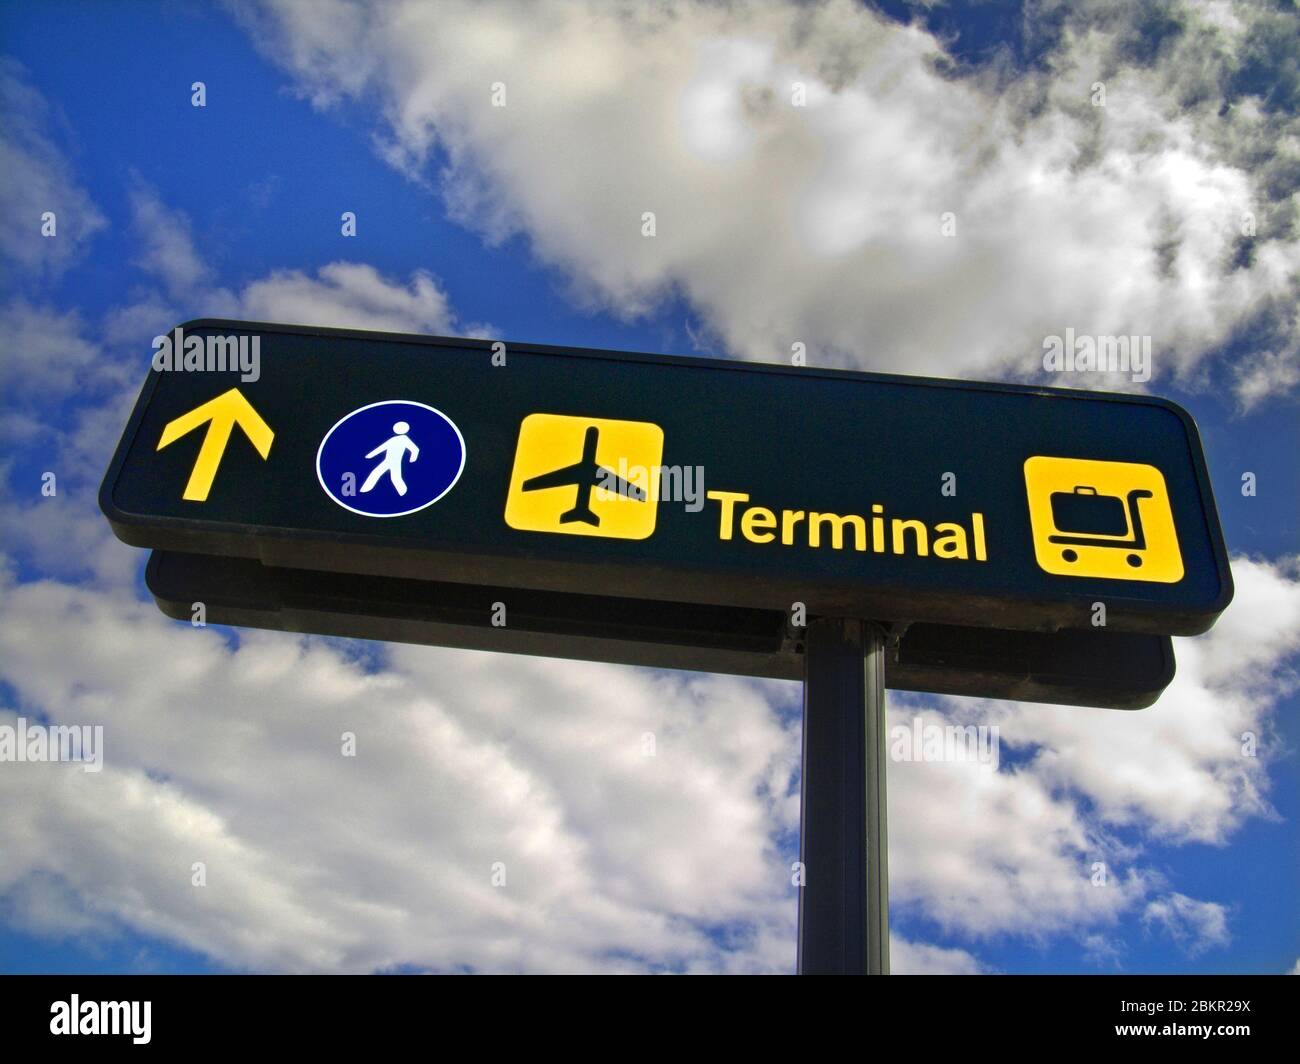 Airport terminal international travel information symbols signage for departing airline passengers, directing to terminals, airlines, baggage drop, walkway Stock Photo